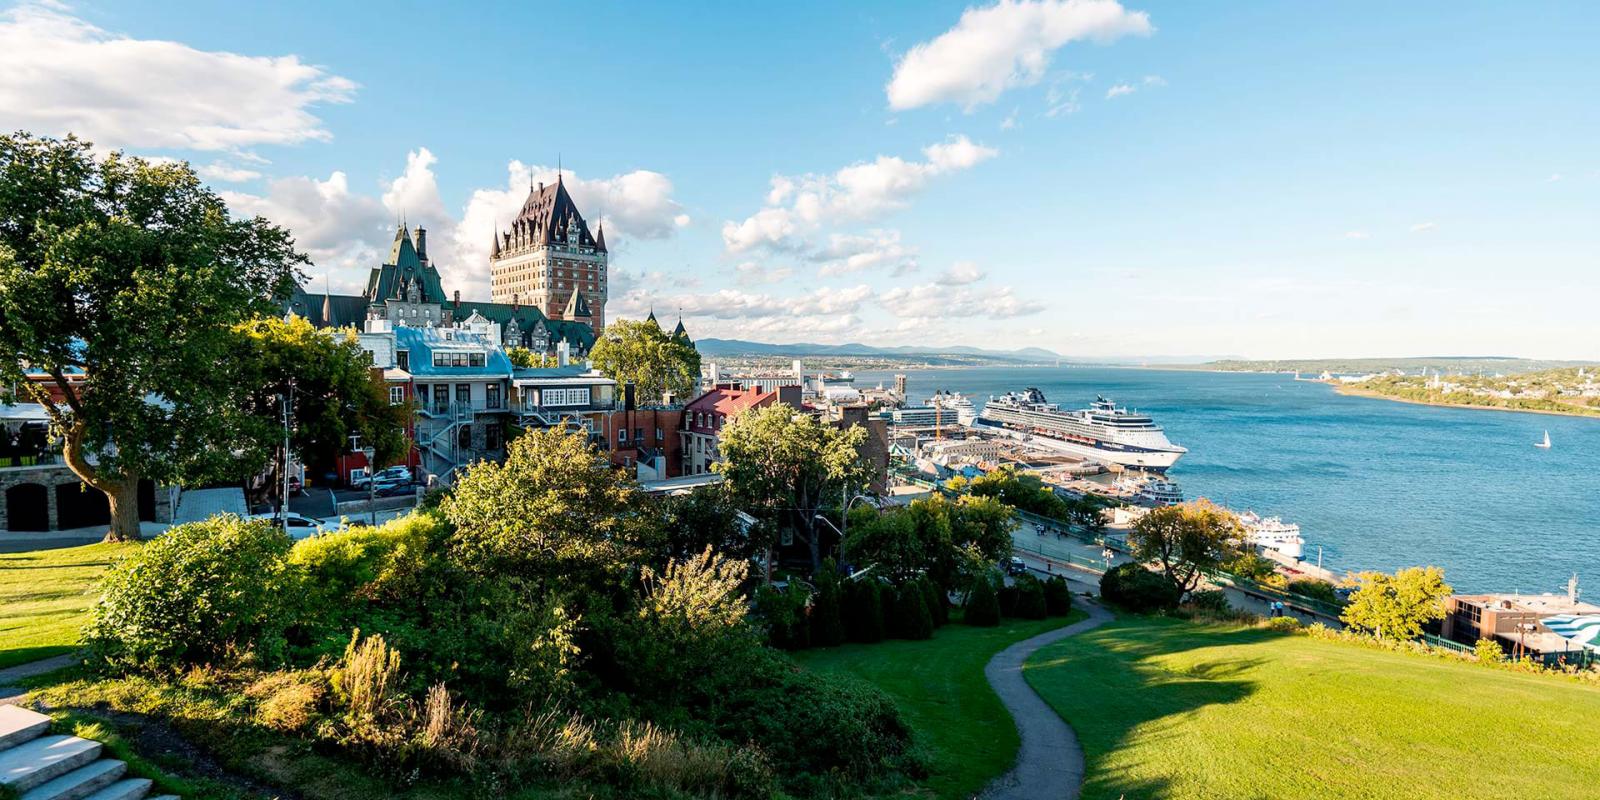 View of the Dufferin terrace, the Château Frontenac, the Old Port and the river from the Pierre-Dugua-De Mons terrace.